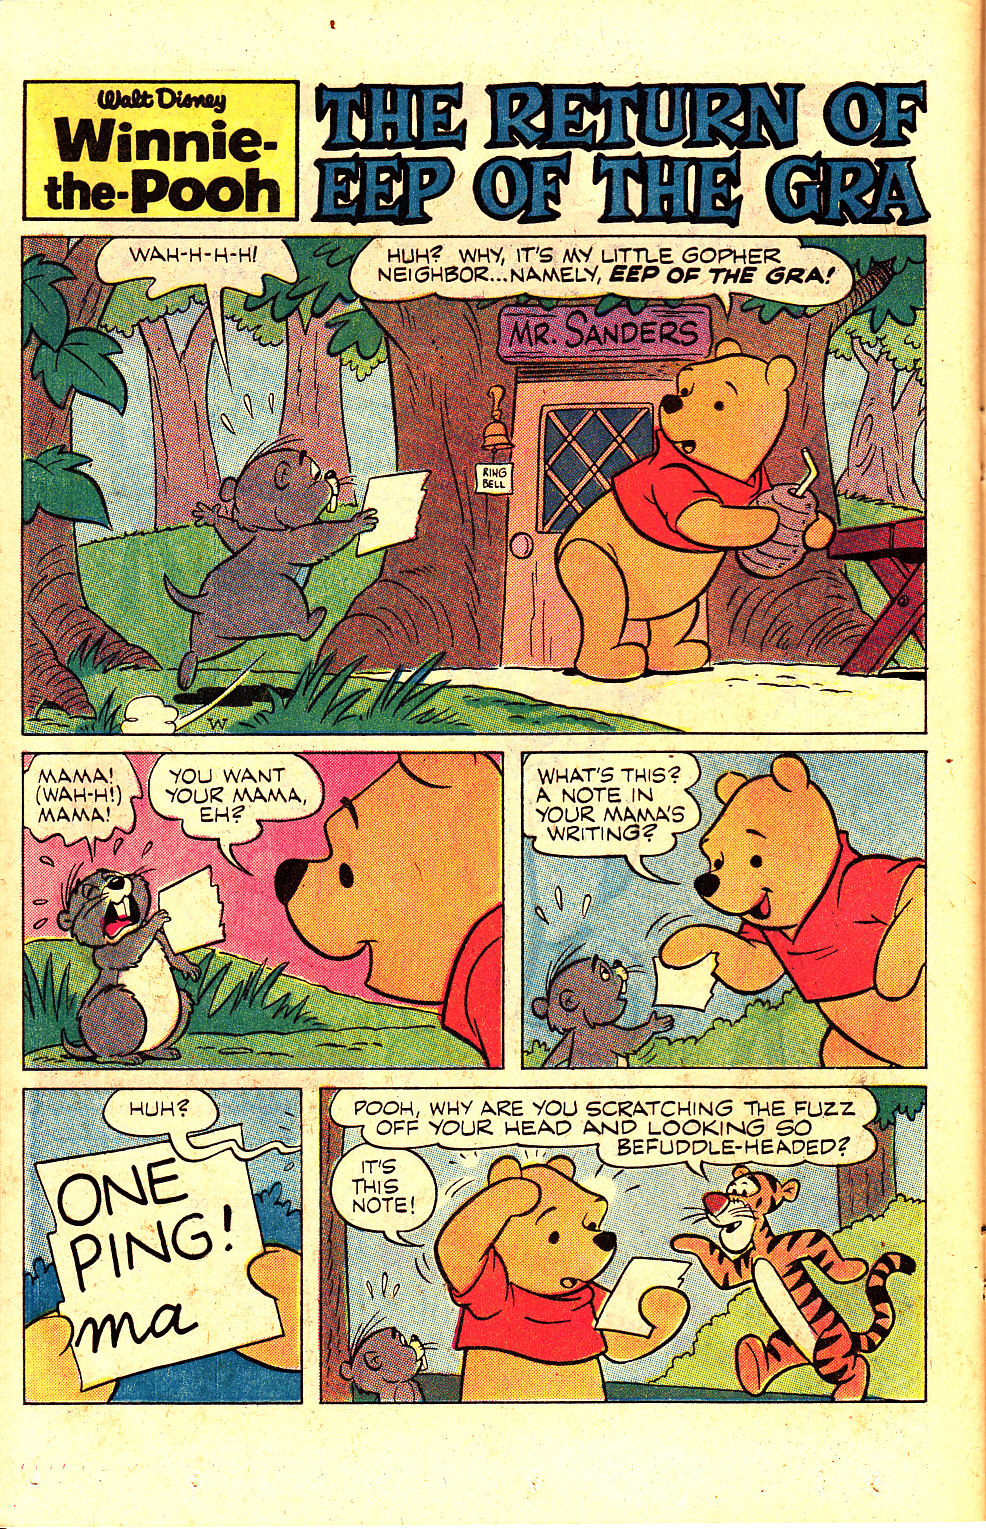 Read online Winnie-the-Pooh comic -  Issue #22 - 24